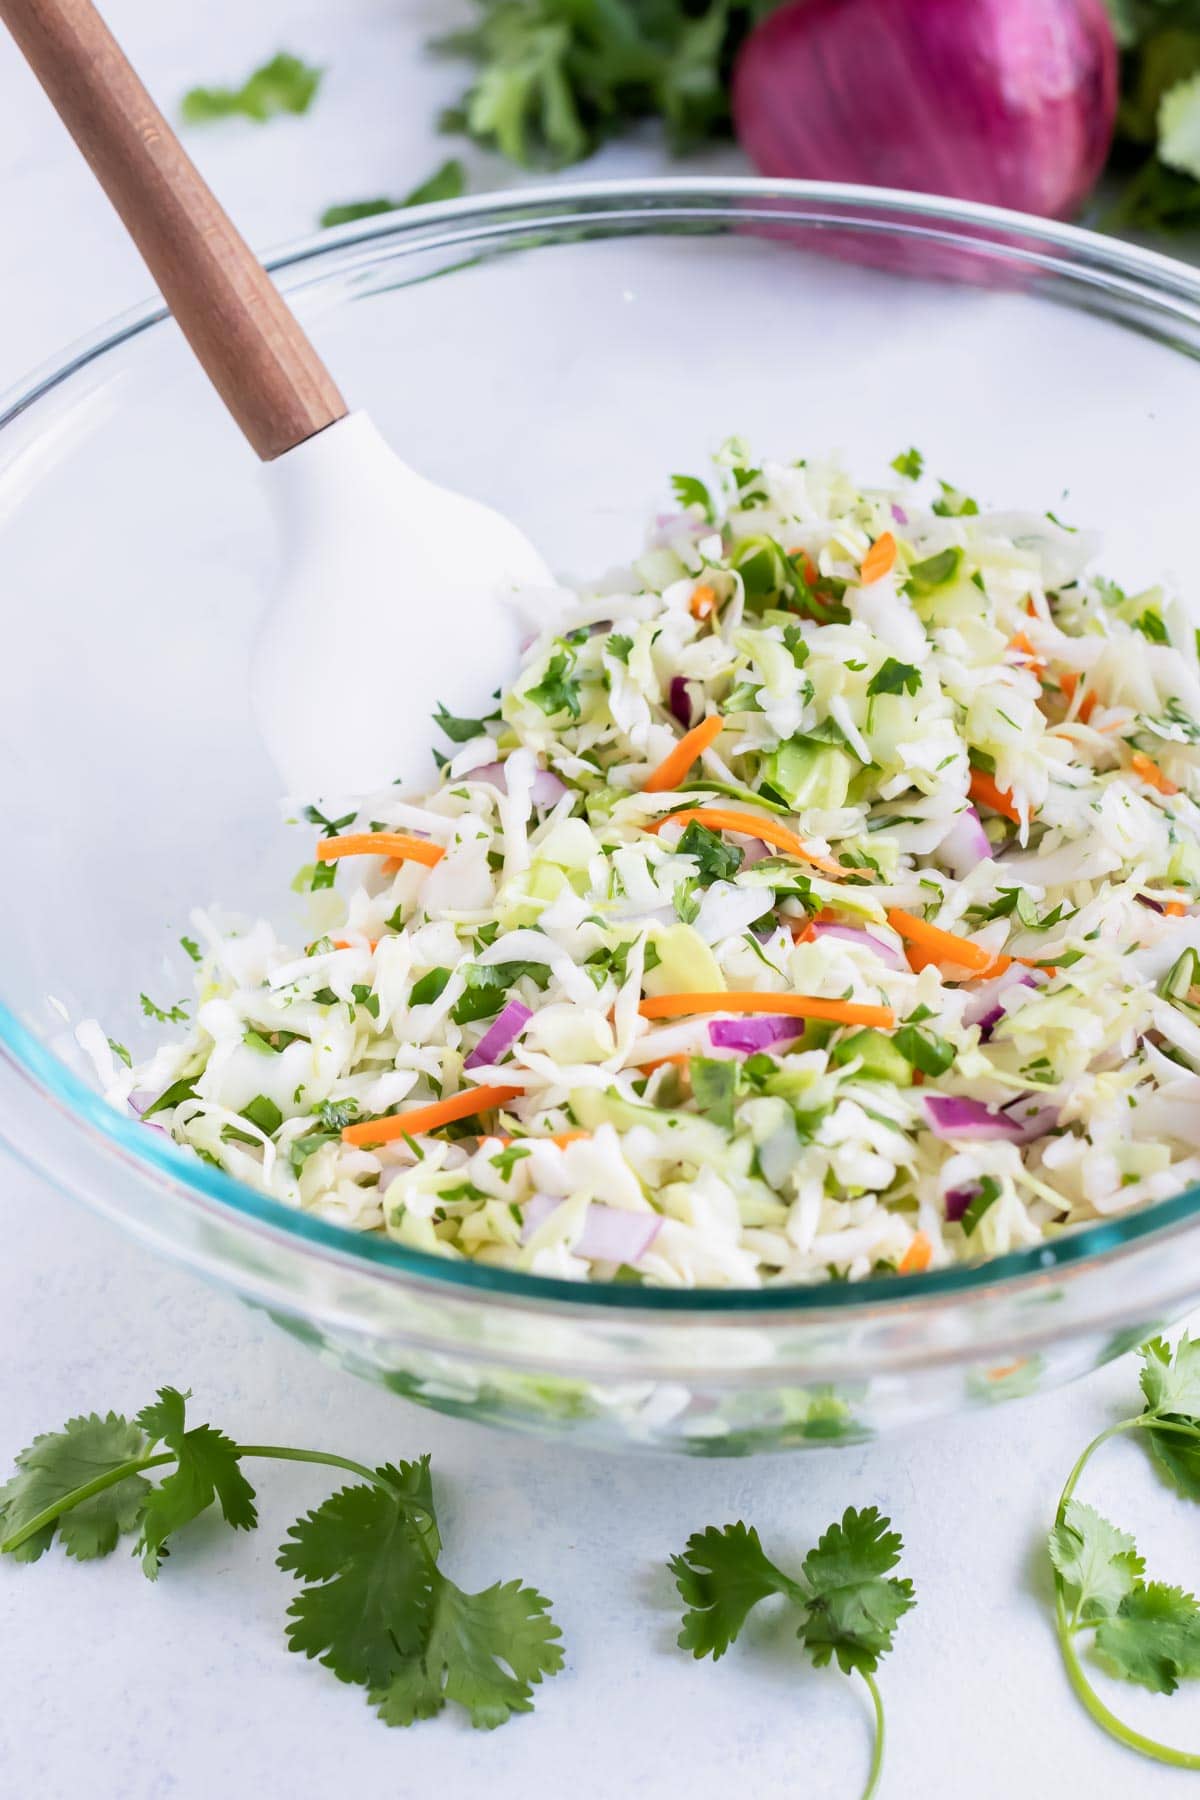 All the ingredients are combined for this Fish Taco Slaw recipe.